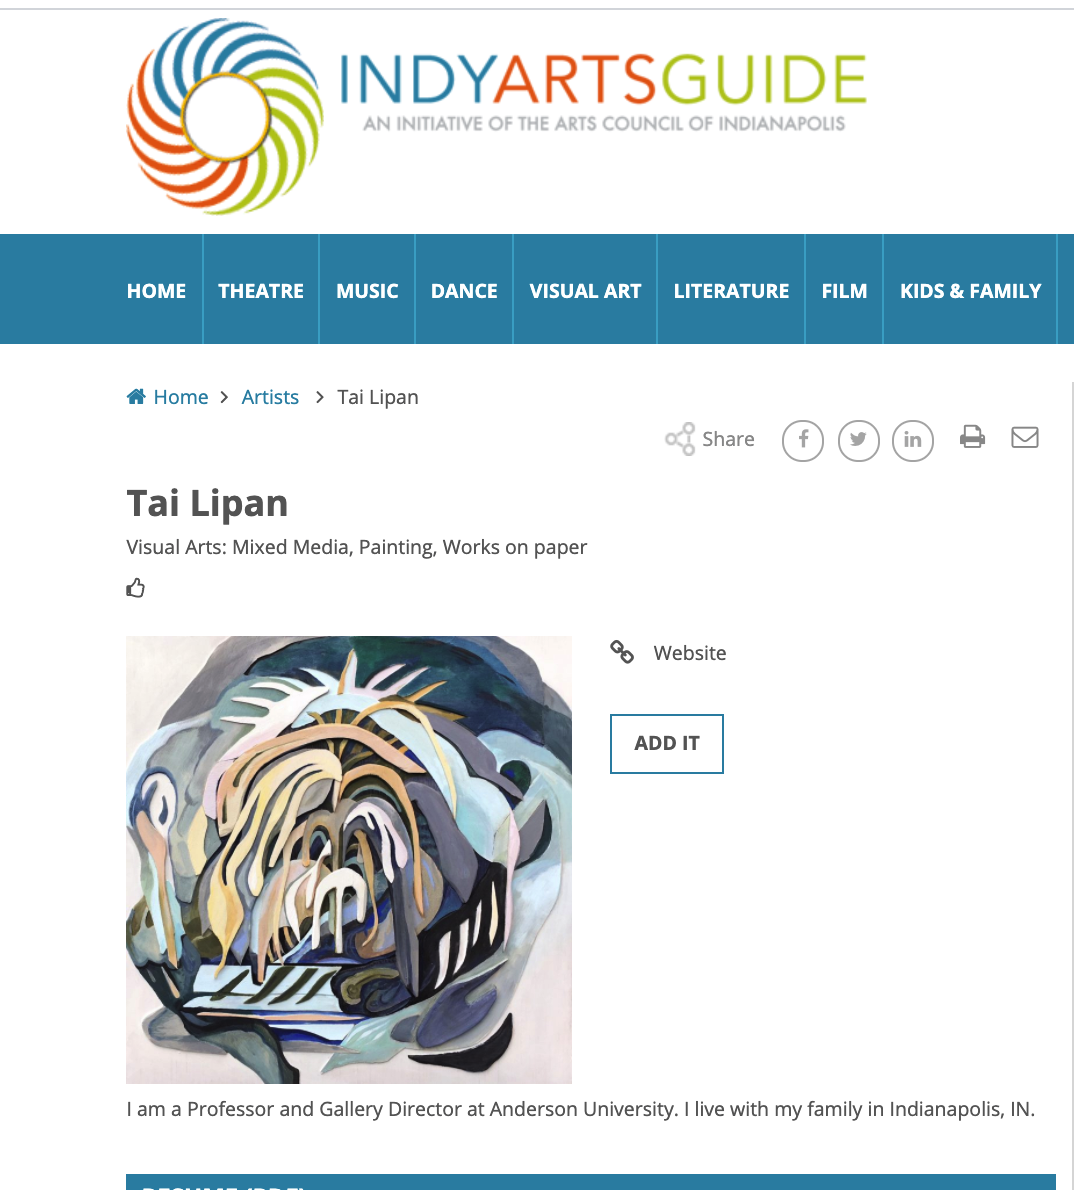 indy arts guide image, 21.png